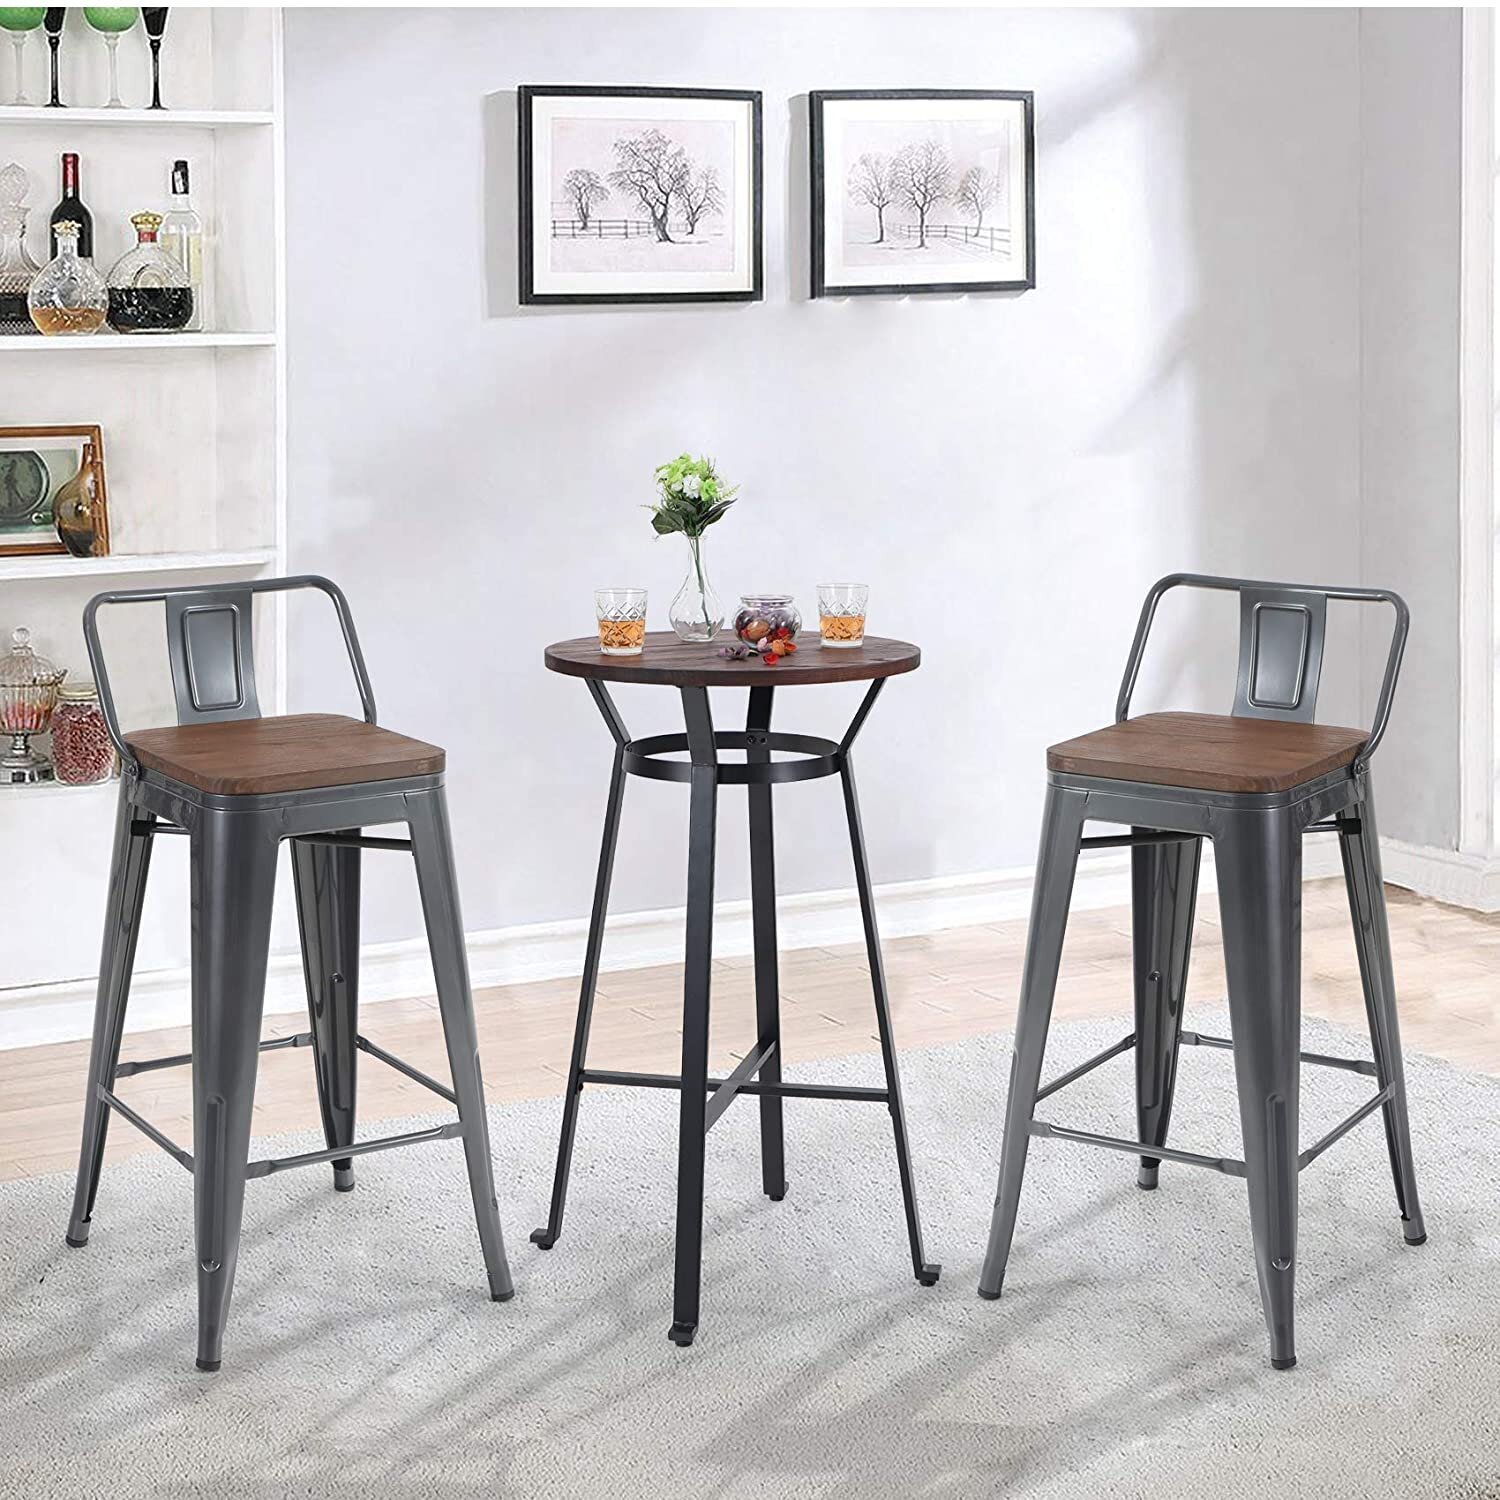 Small Bar Height Table and Chairs